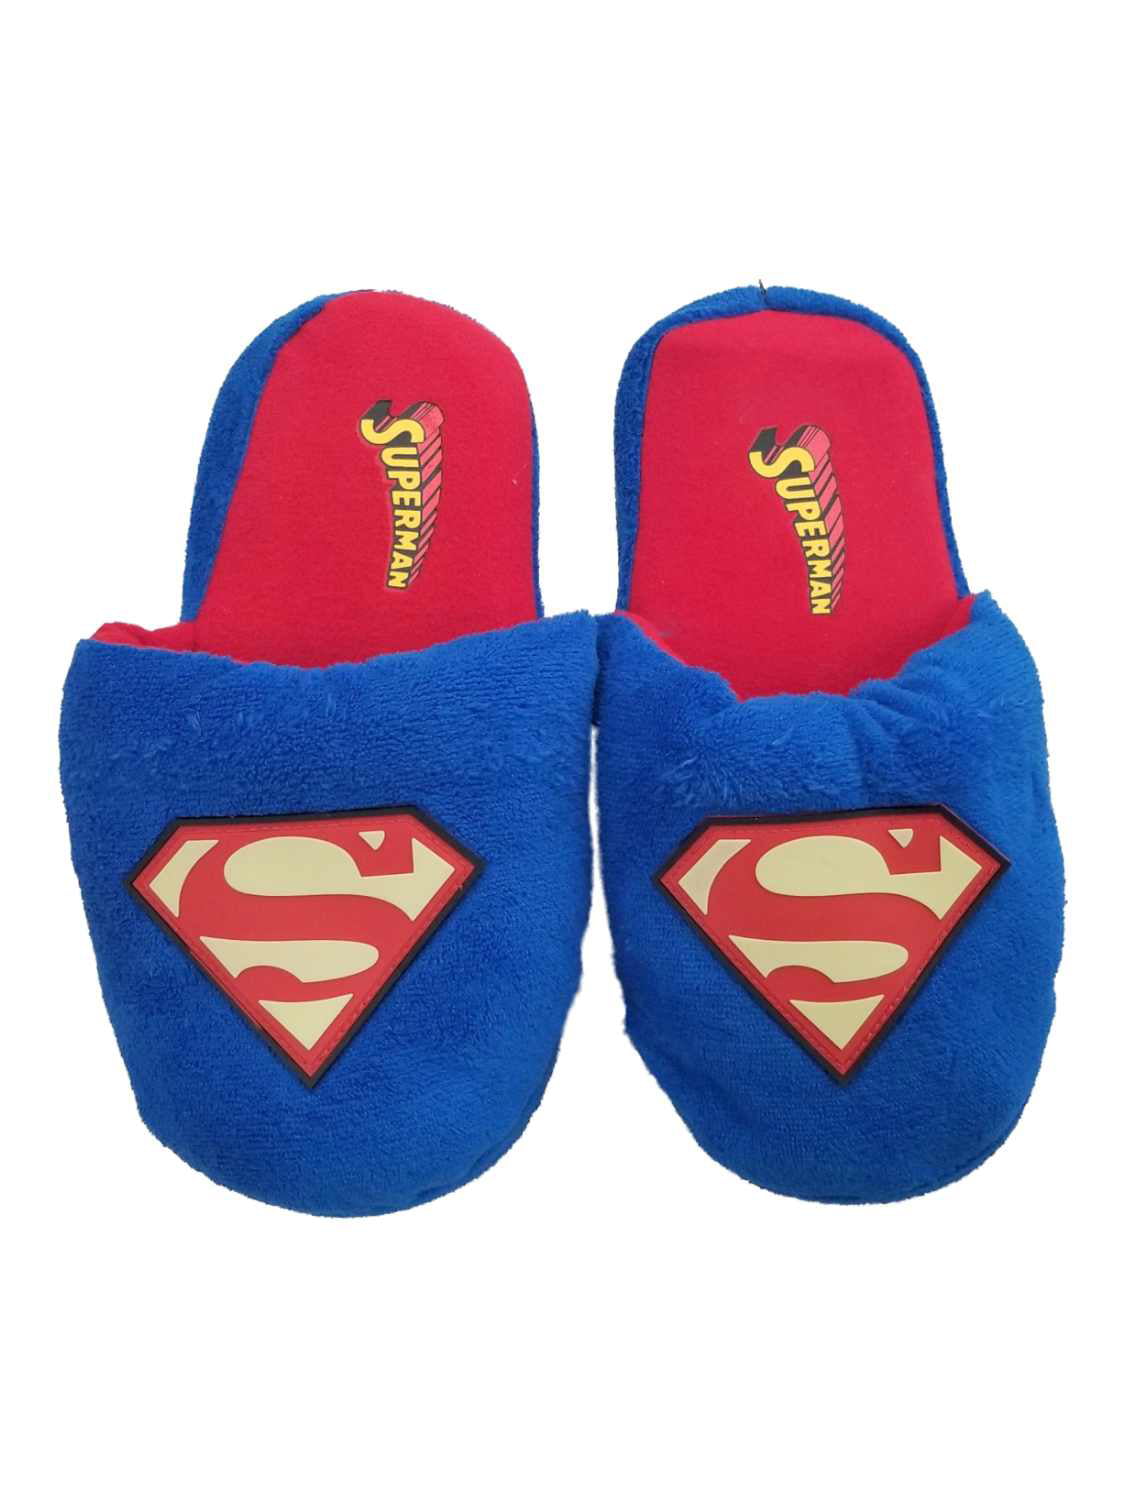 slippers with grippers